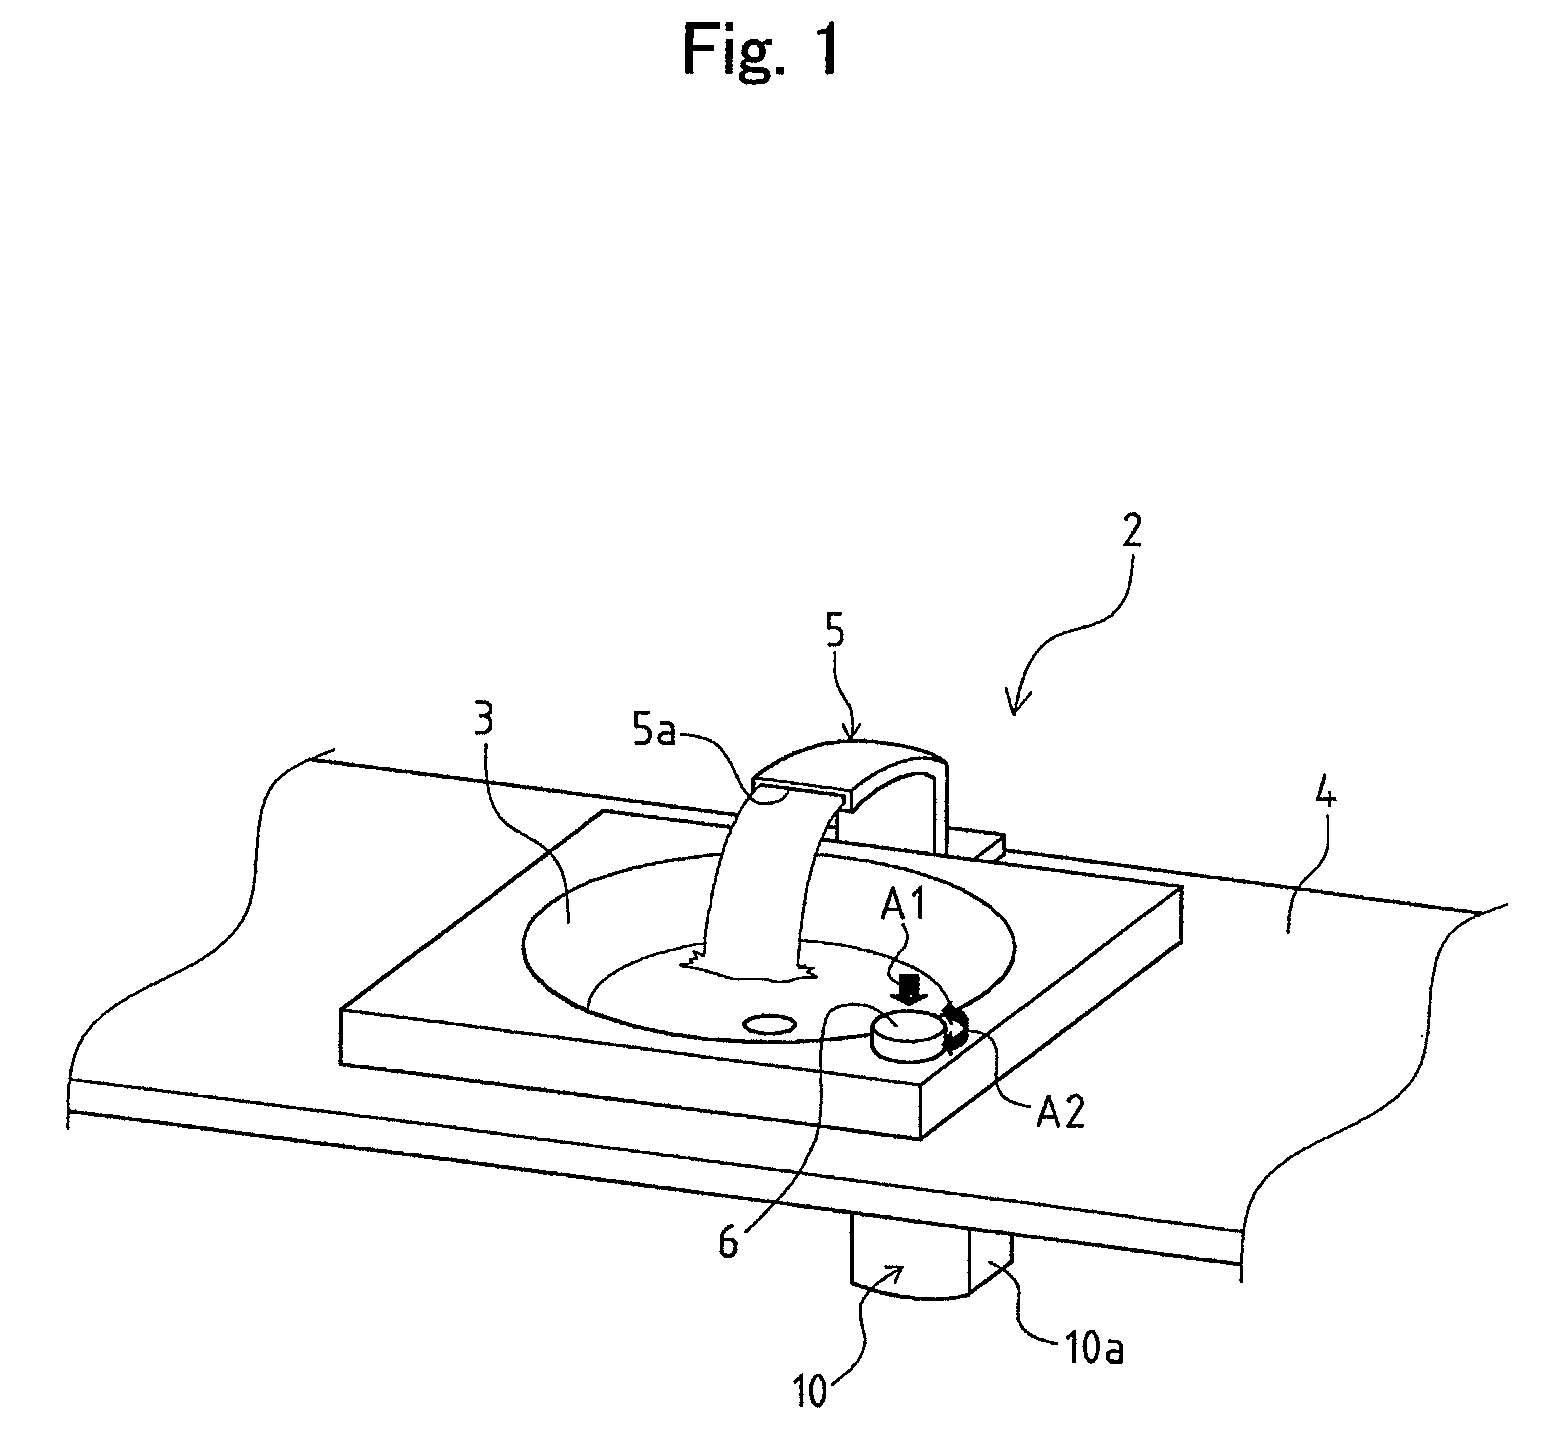 Water-and-hot-water mixing device